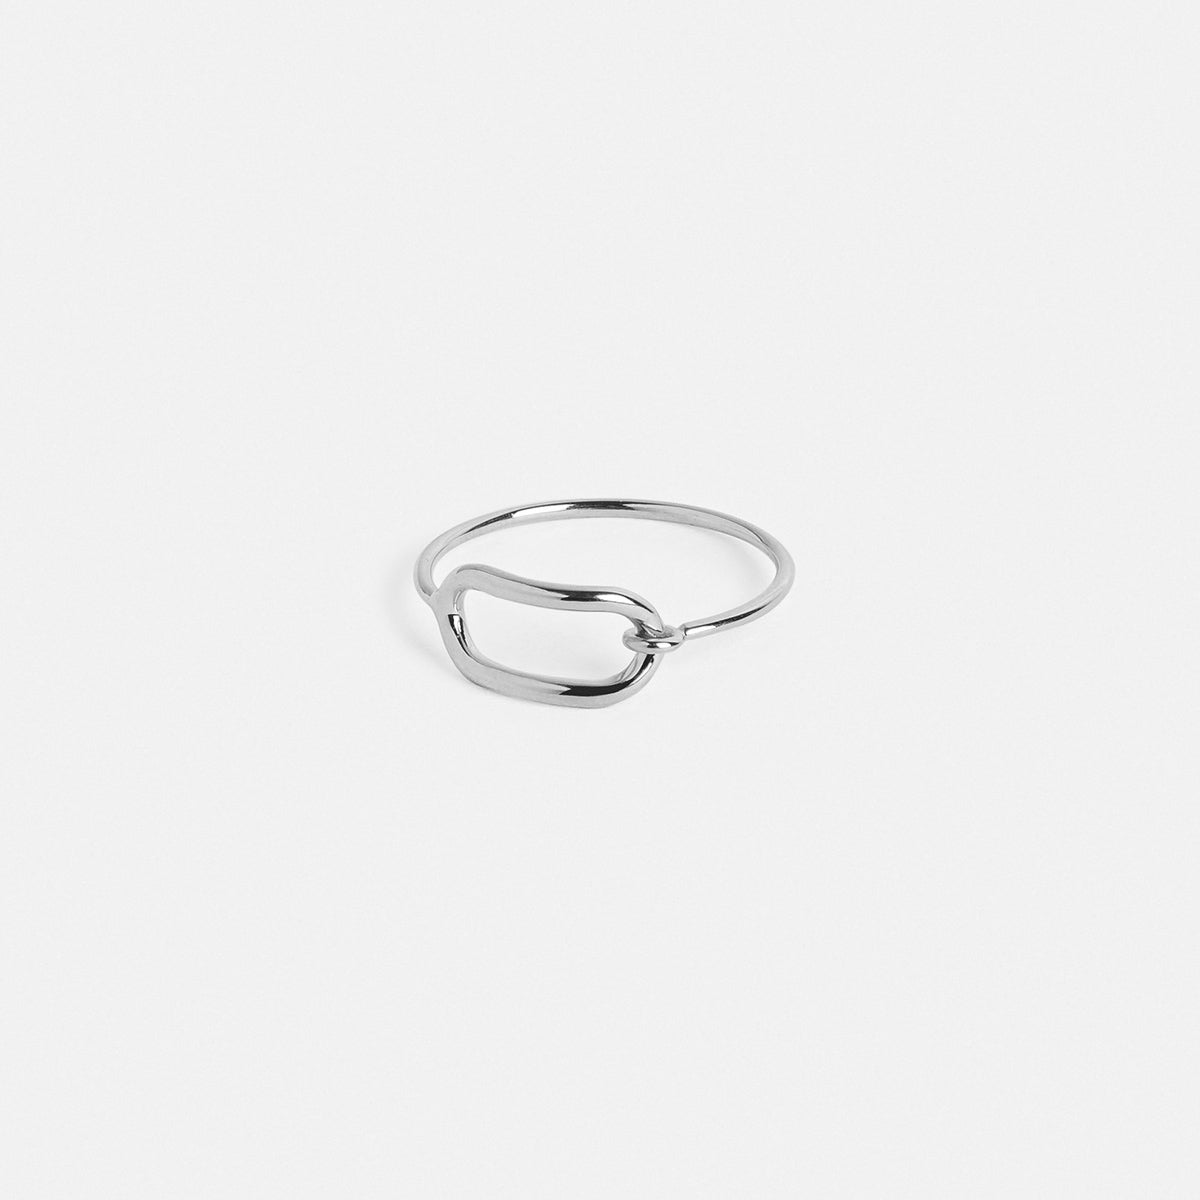 Vel Non-Traditional Ring in 14k White Gold by SHW Fine Jewelry